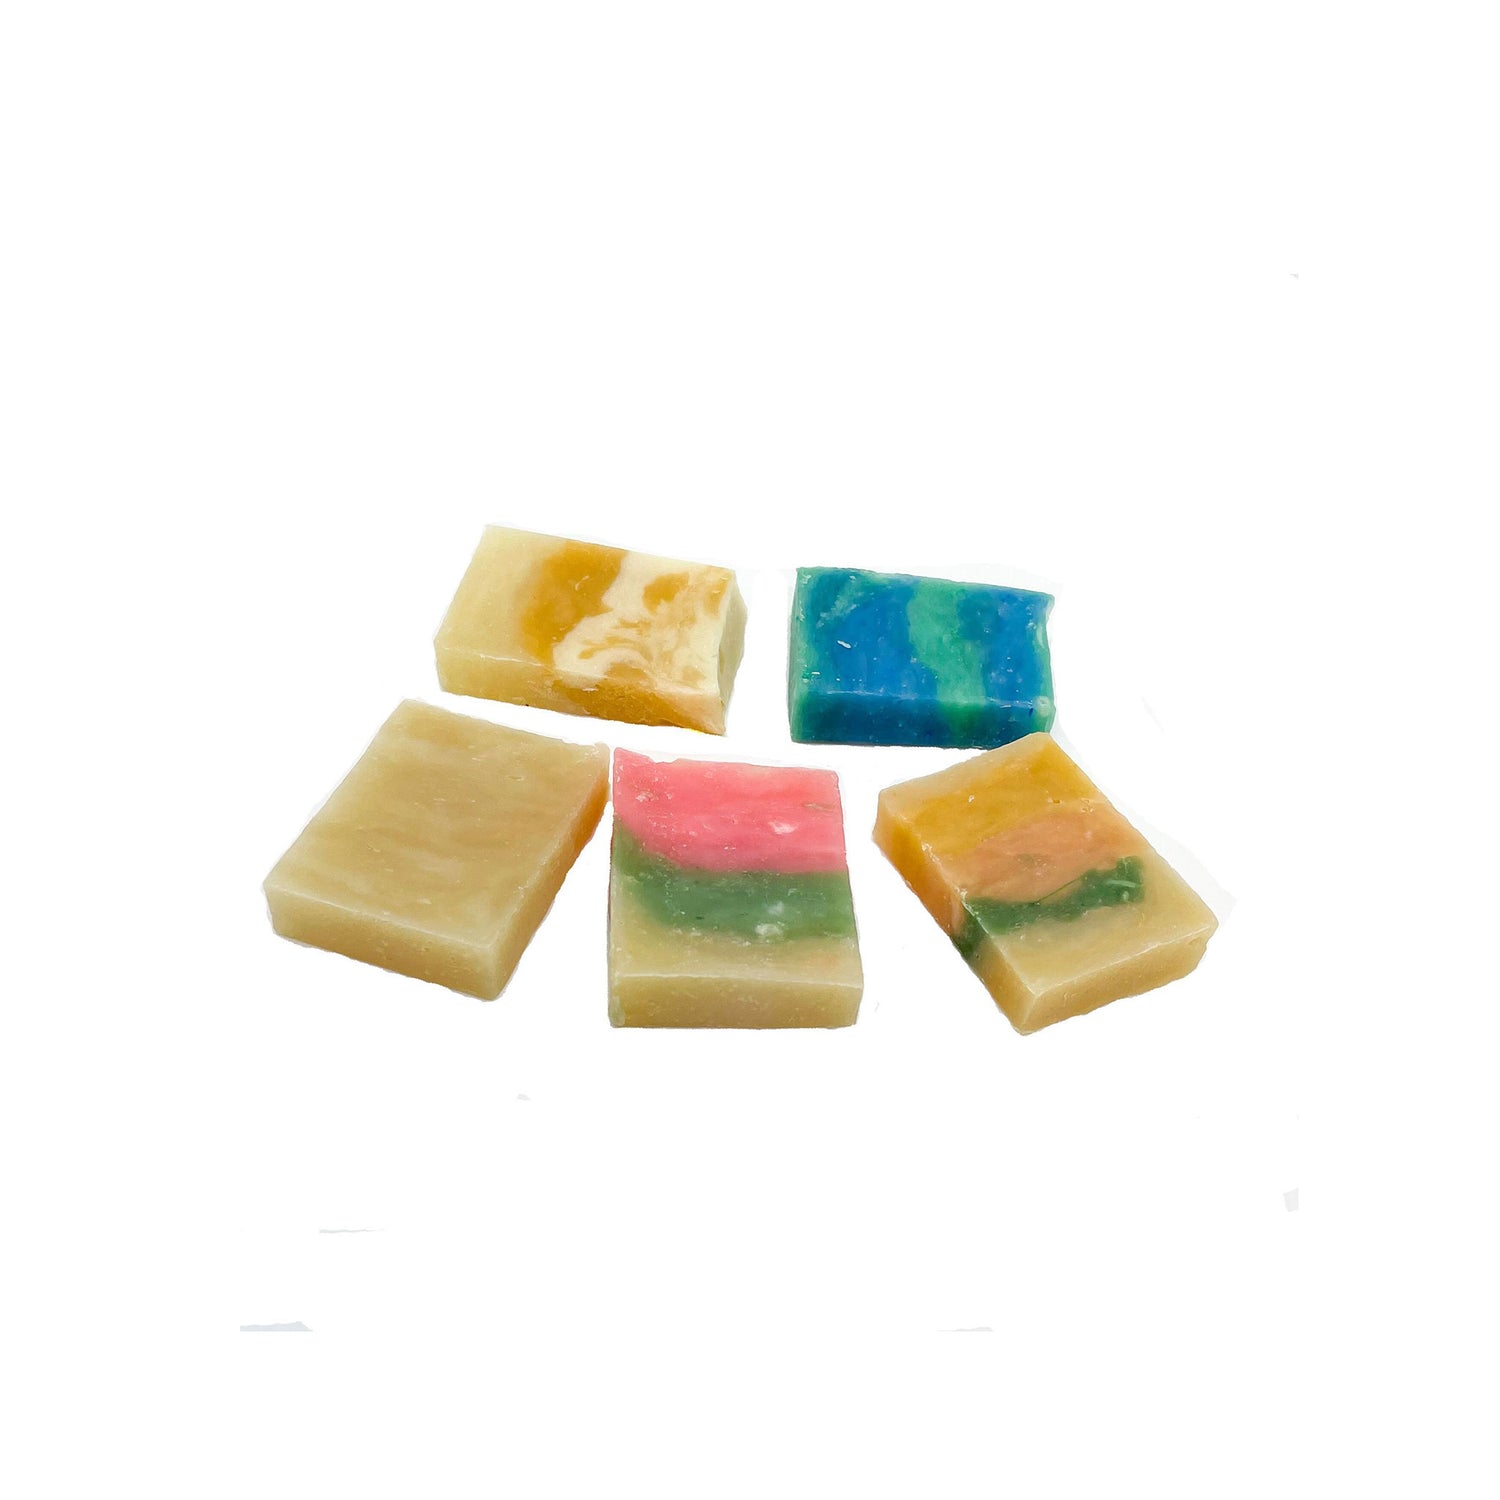 Handmade Soap Samples by JDNatlady's Creations